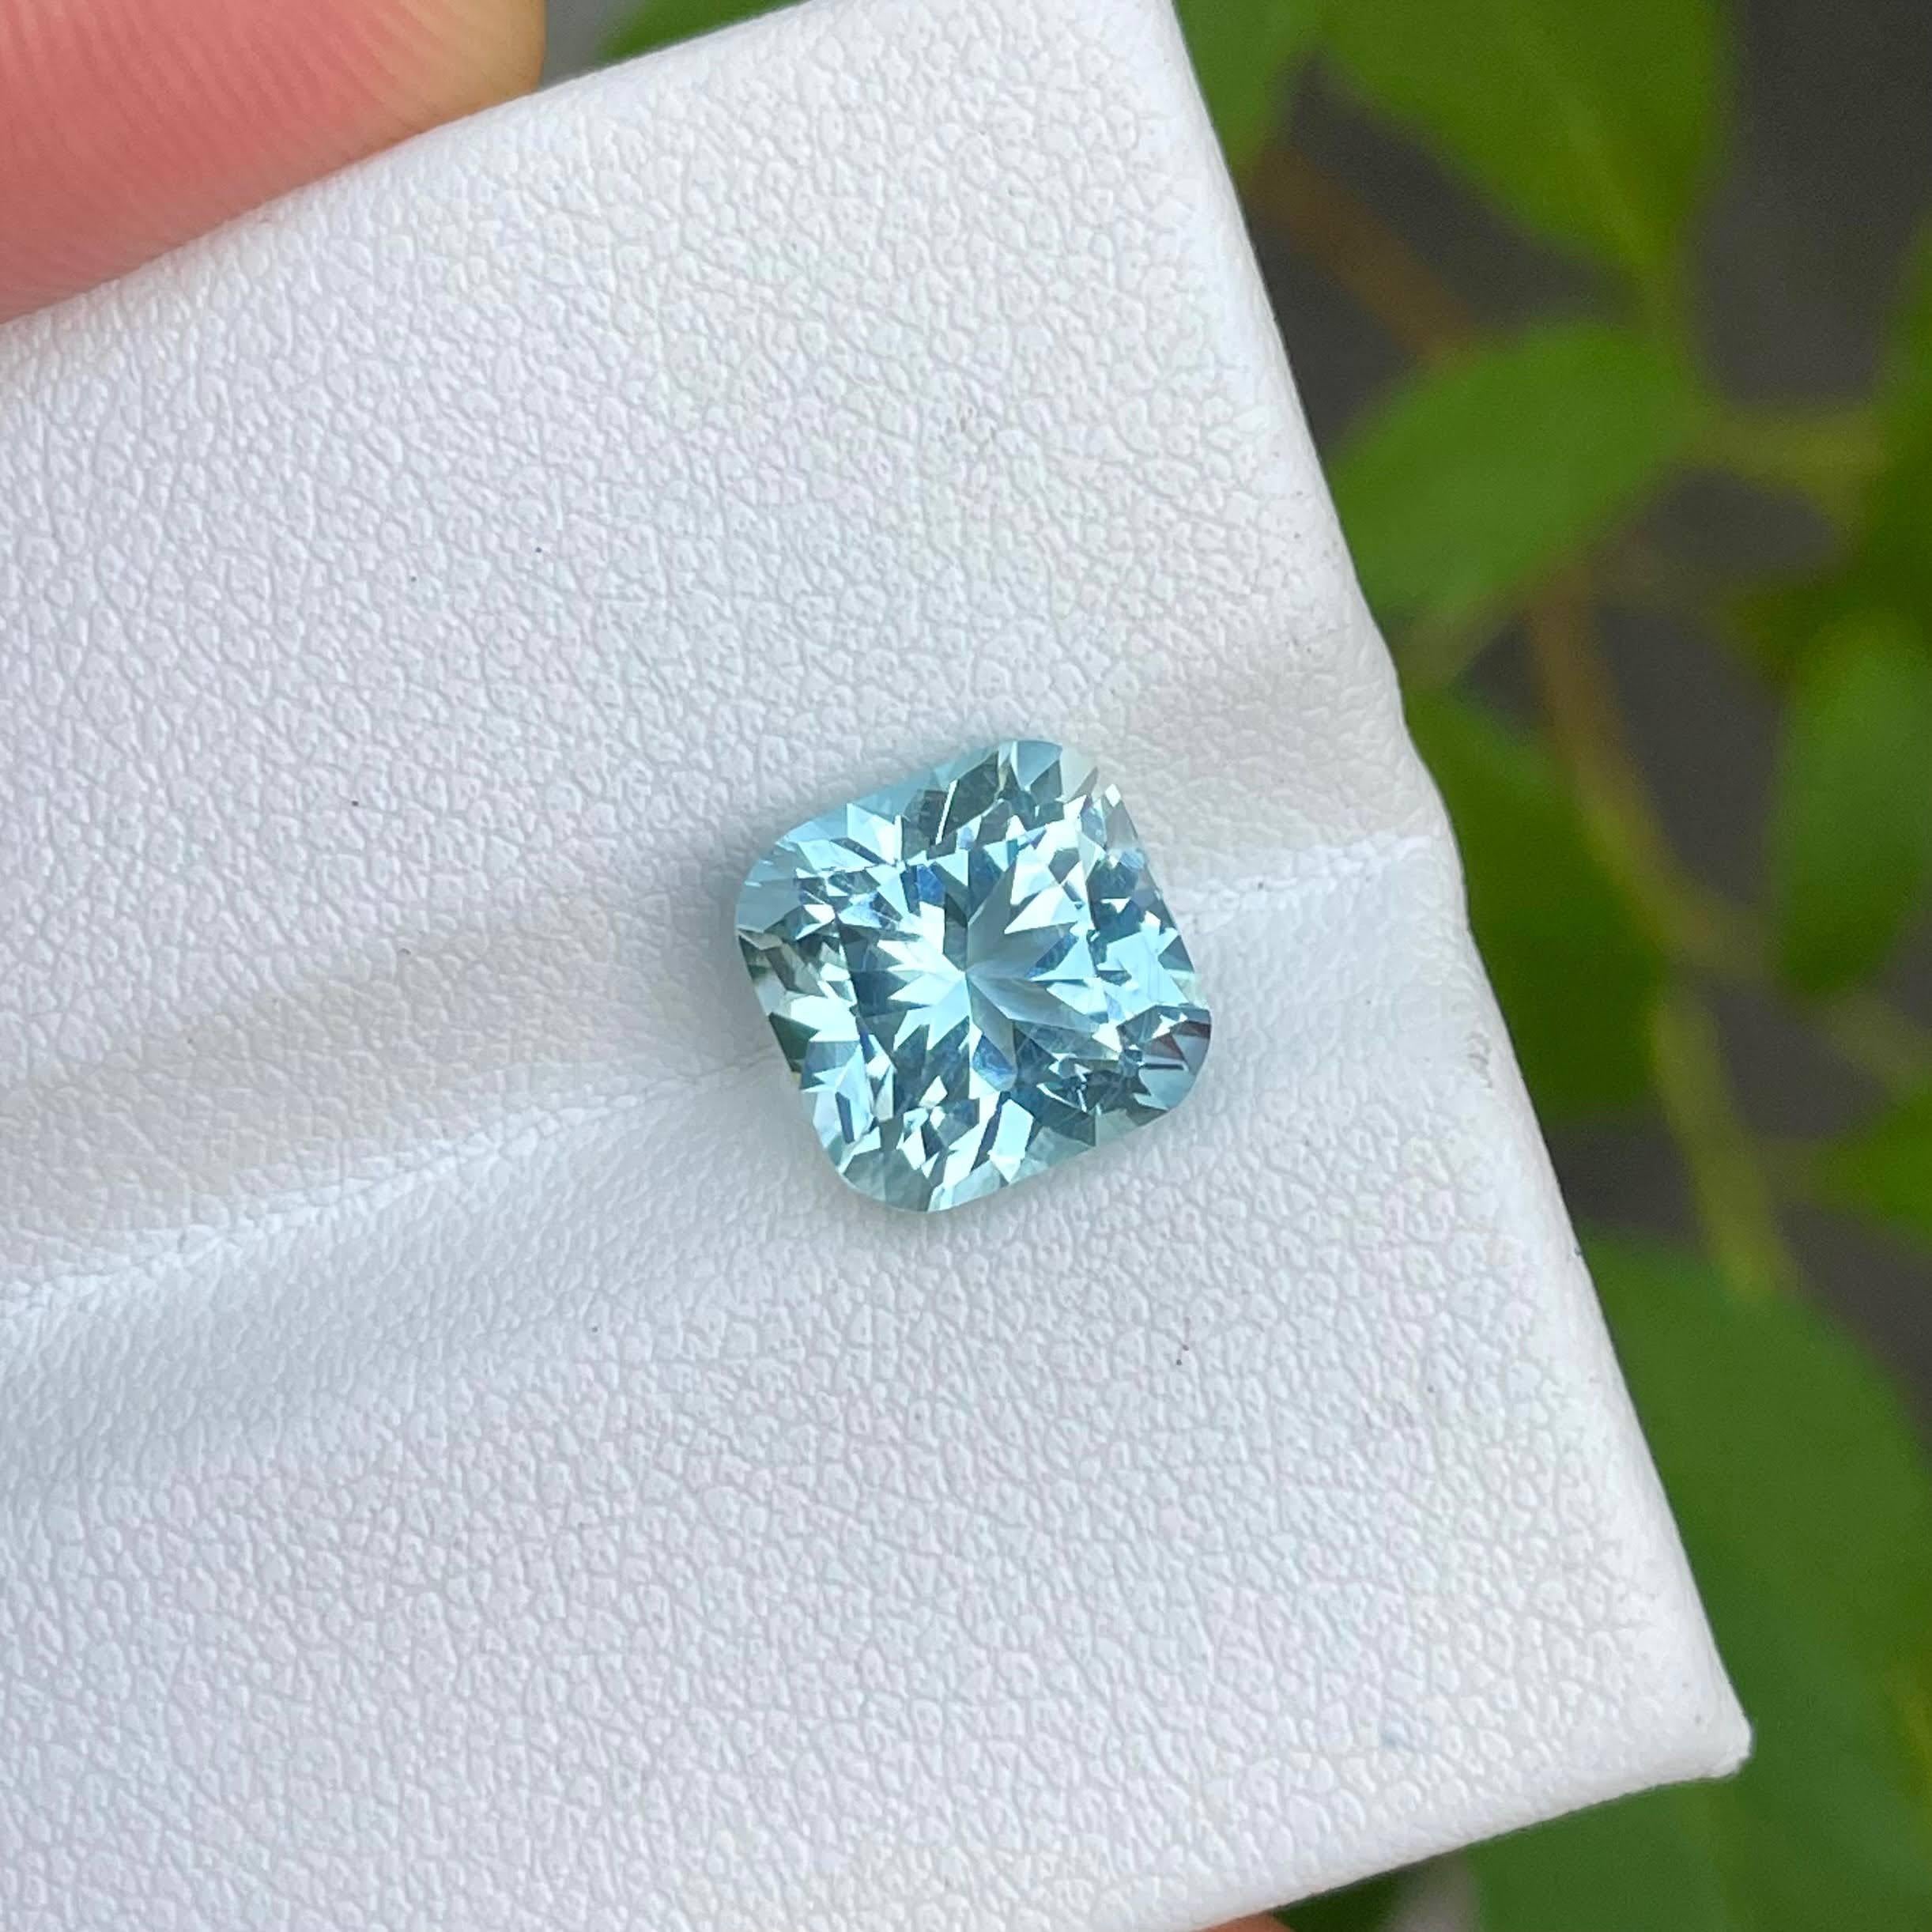 Weight 3.45 carats 
Dimensions 8.7x8.7x6.92 mm
Treatment none 
Origin Nigeria 
Clarity VVS
Shape square 
Cut custom precision




This exquisite gemstone boasts a captivating 3.45-carat Aquamarine of unparalleled quality, sourced from the rich mines